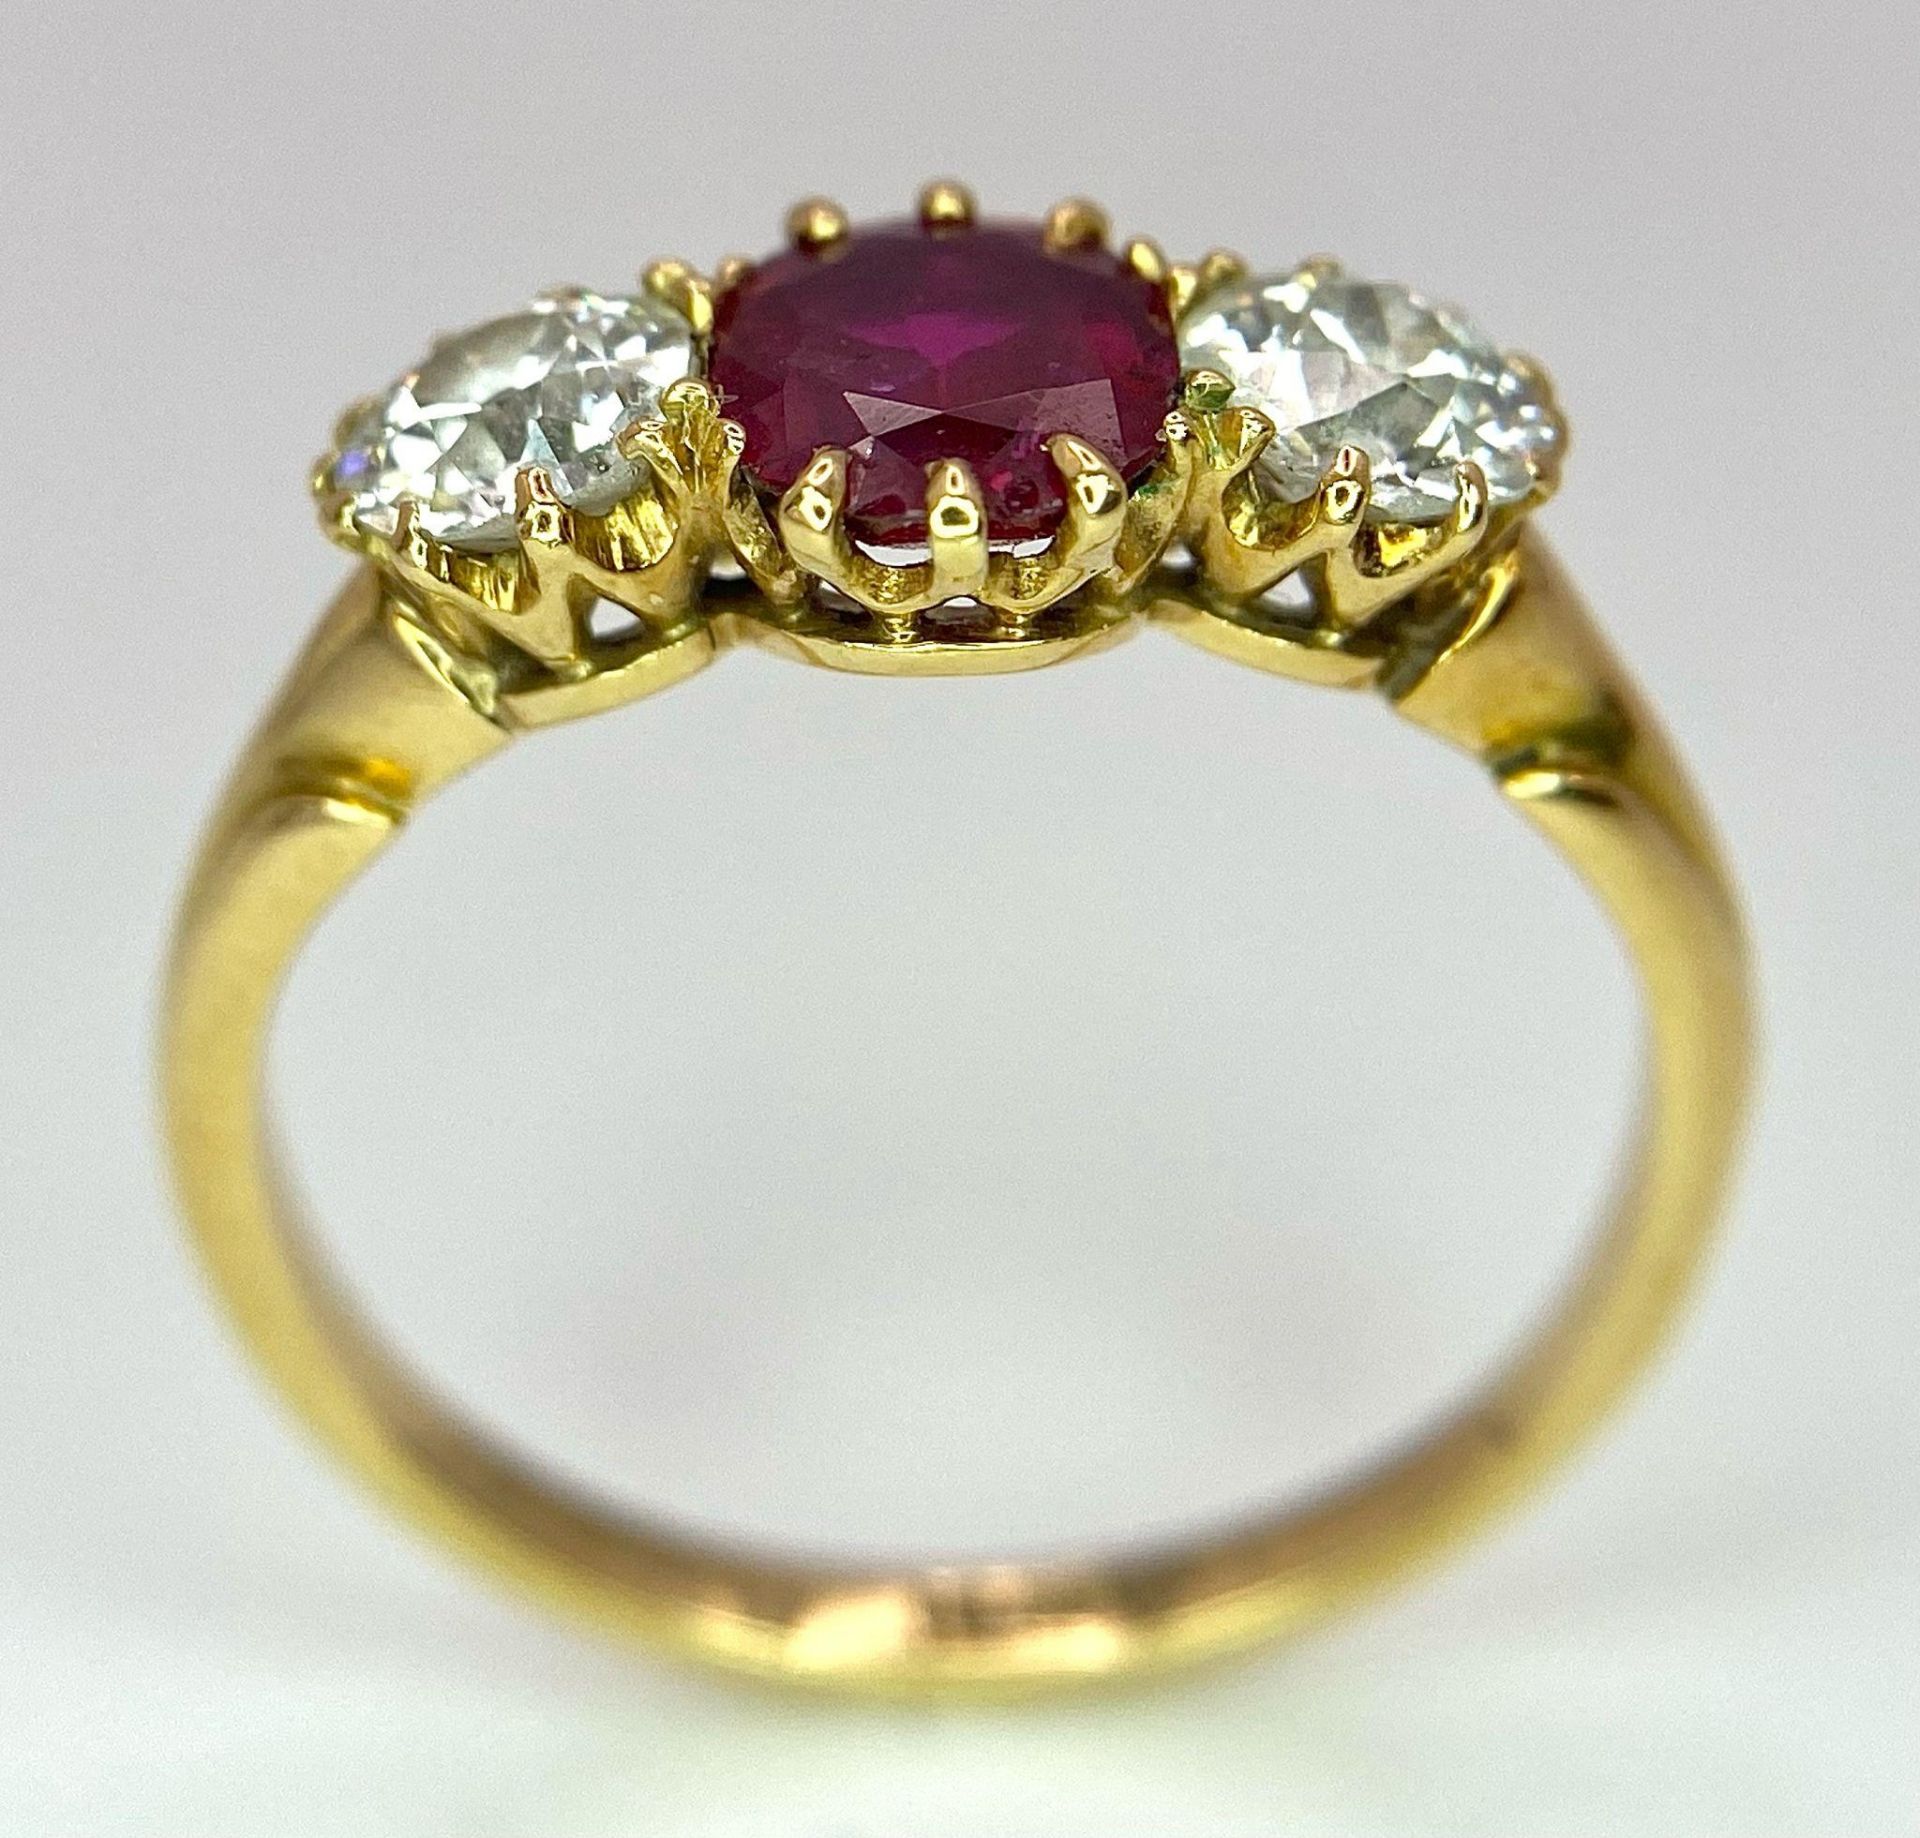 A Mesmerising 18K Yellow Gold, Ruby and Diamond Ring. A deep red oval cut ruby sits central - Bild 6 aus 9